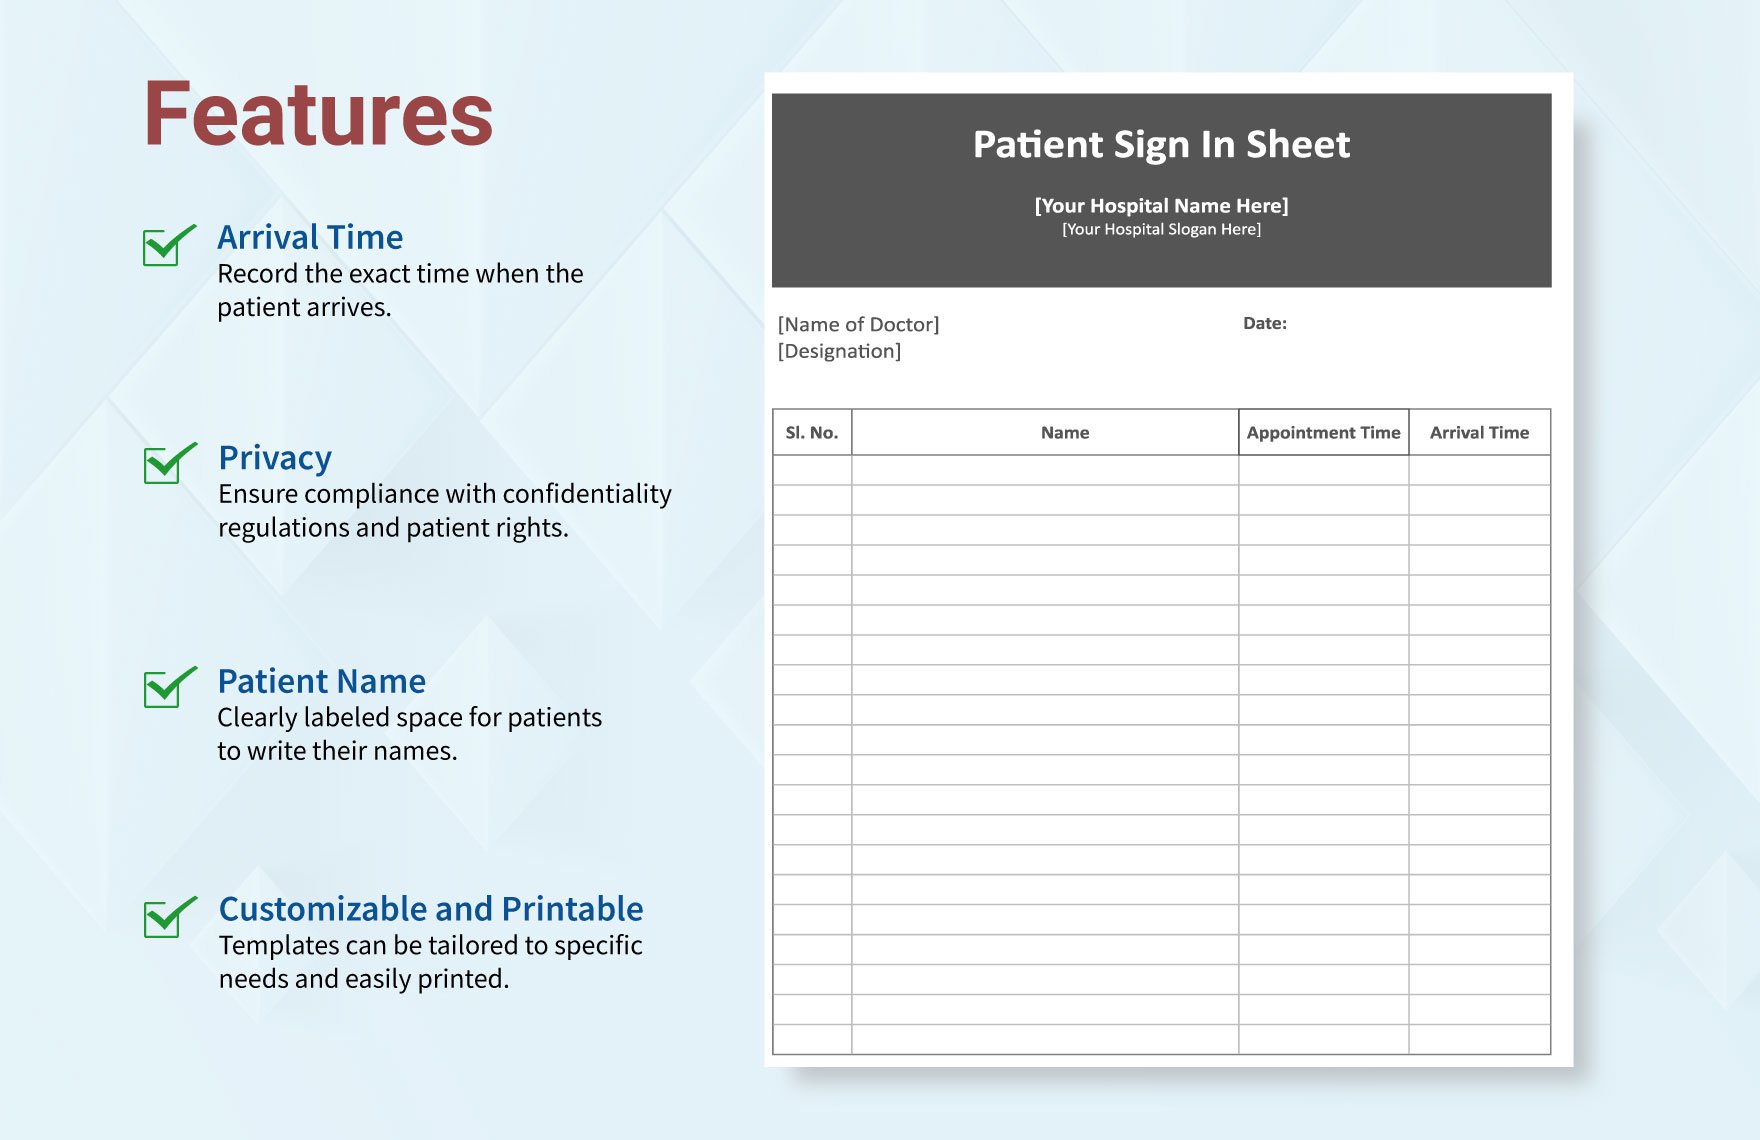 Patient Sign in Sheet Template